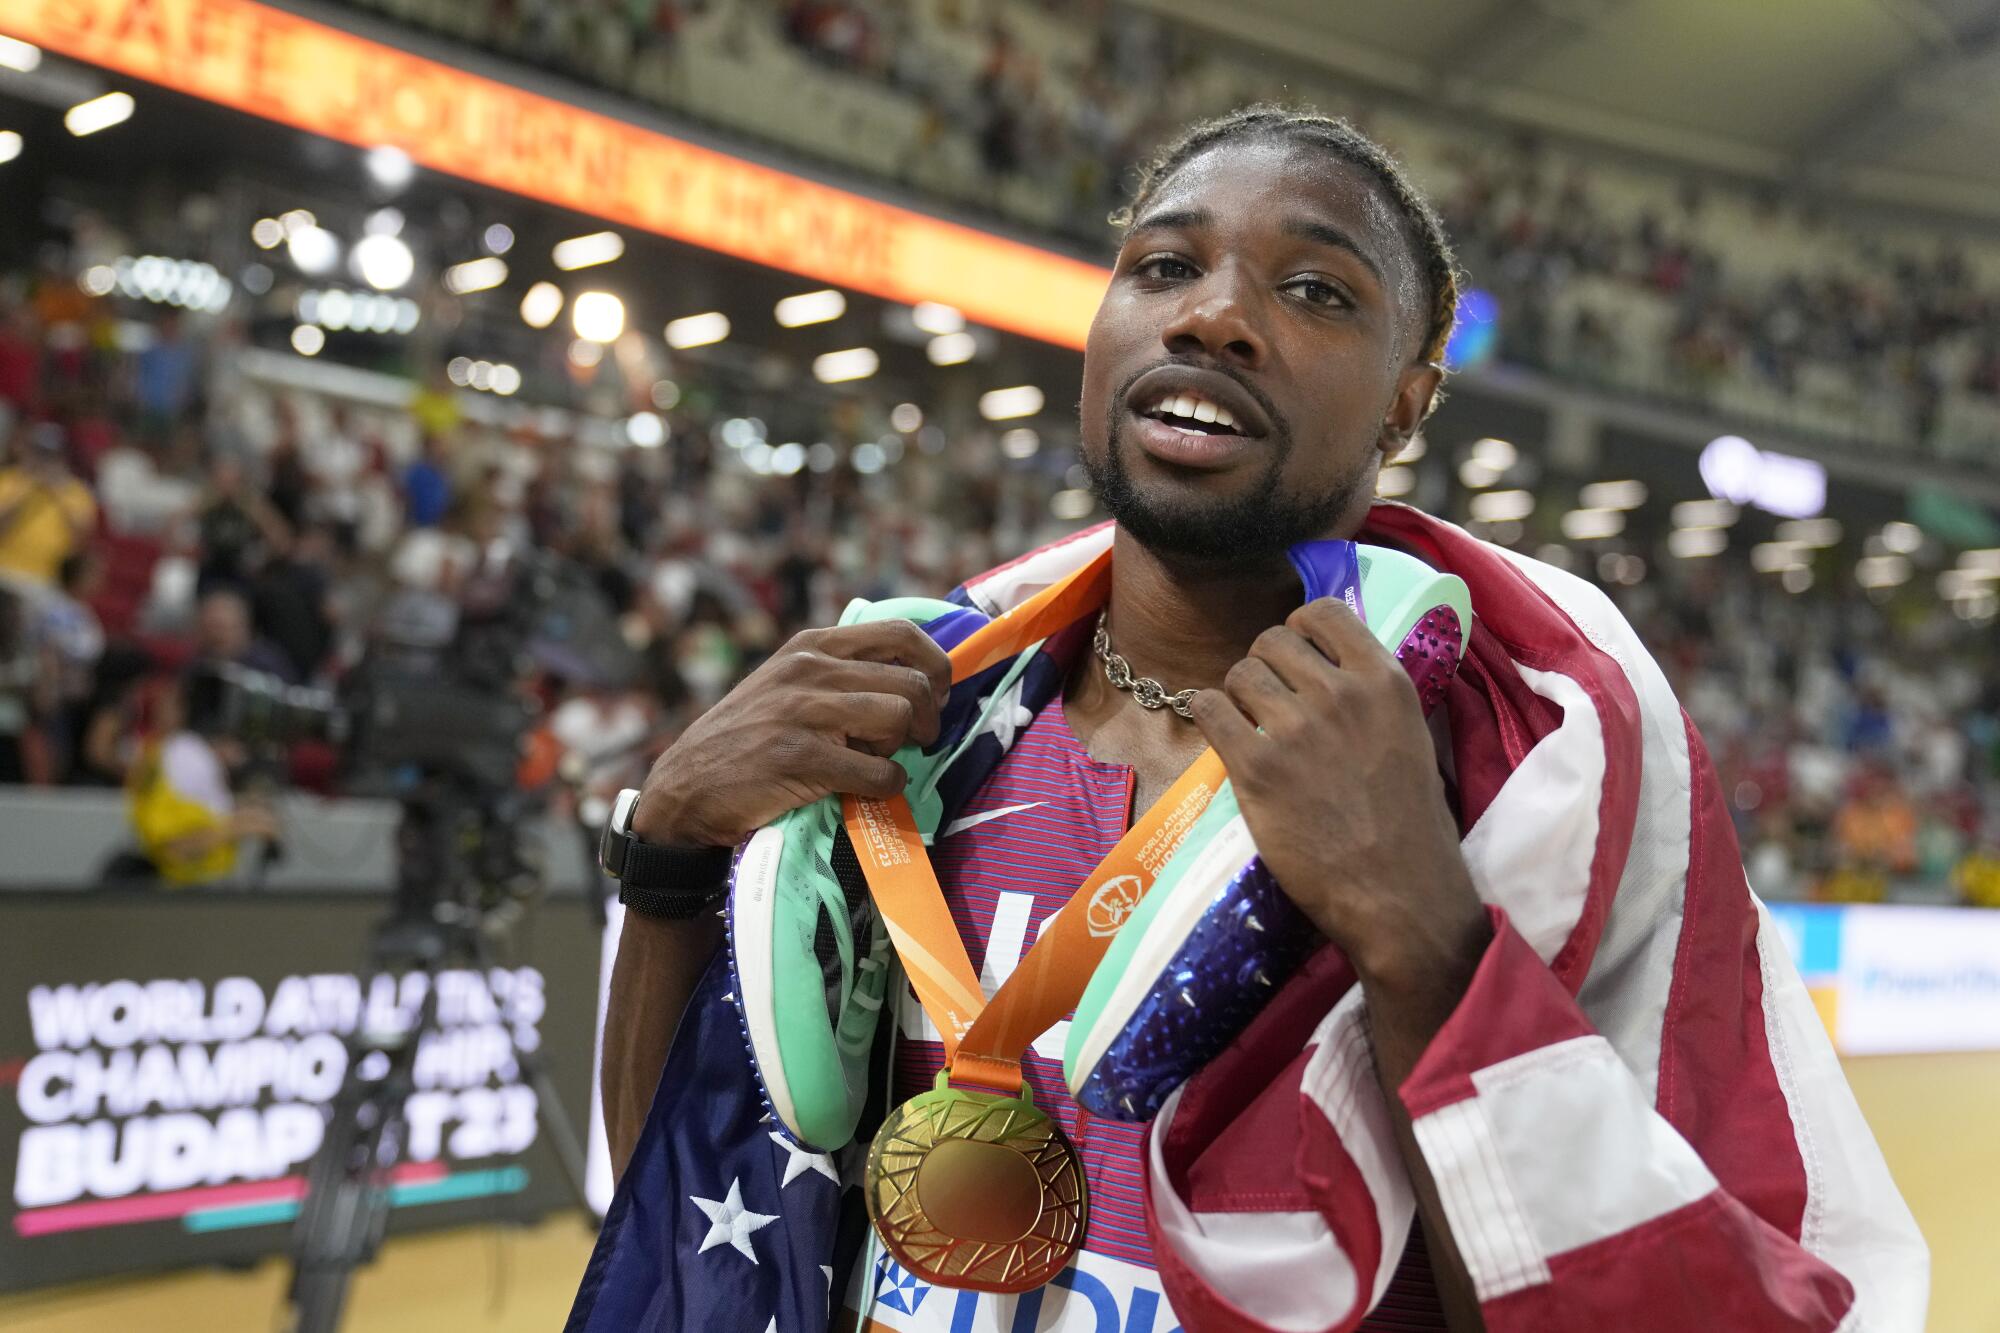 Noah Lyles celebrates with his gold medal after winning the men's 200 meters at the World Athletics Championships on Aug. 25.